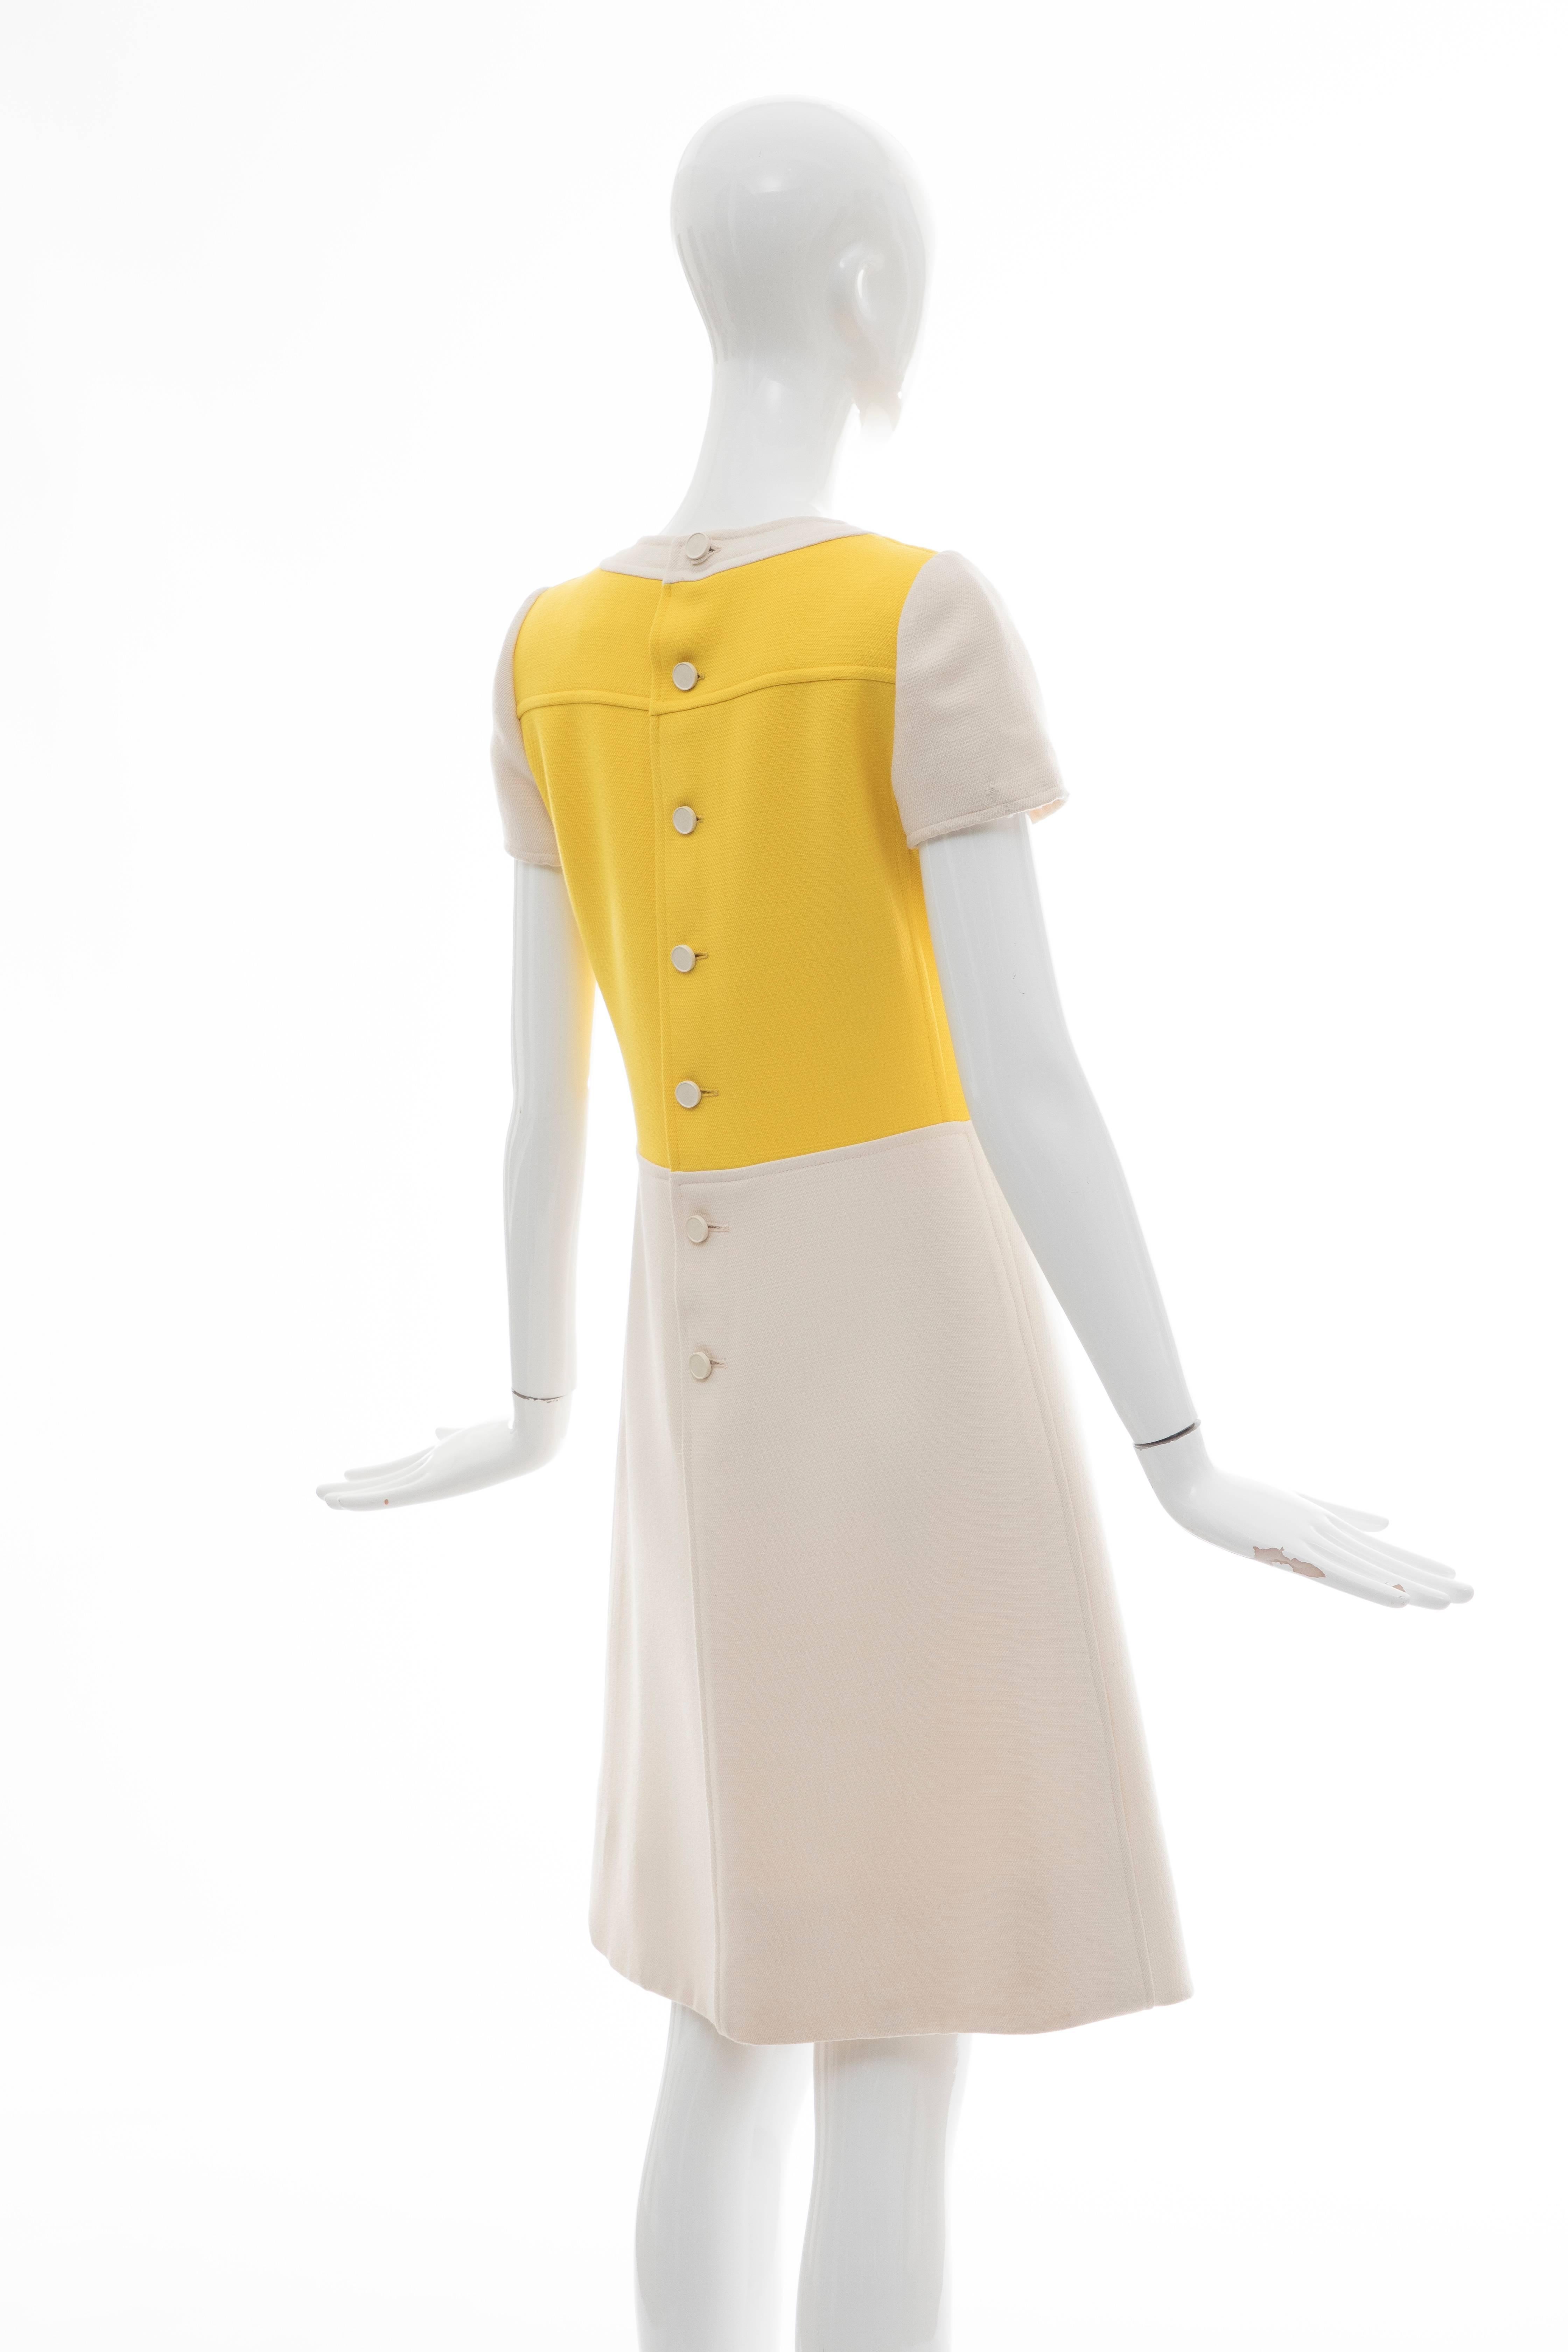 Women's Andre Courreges Wool A-Line Dress , Circa 1960's For Sale